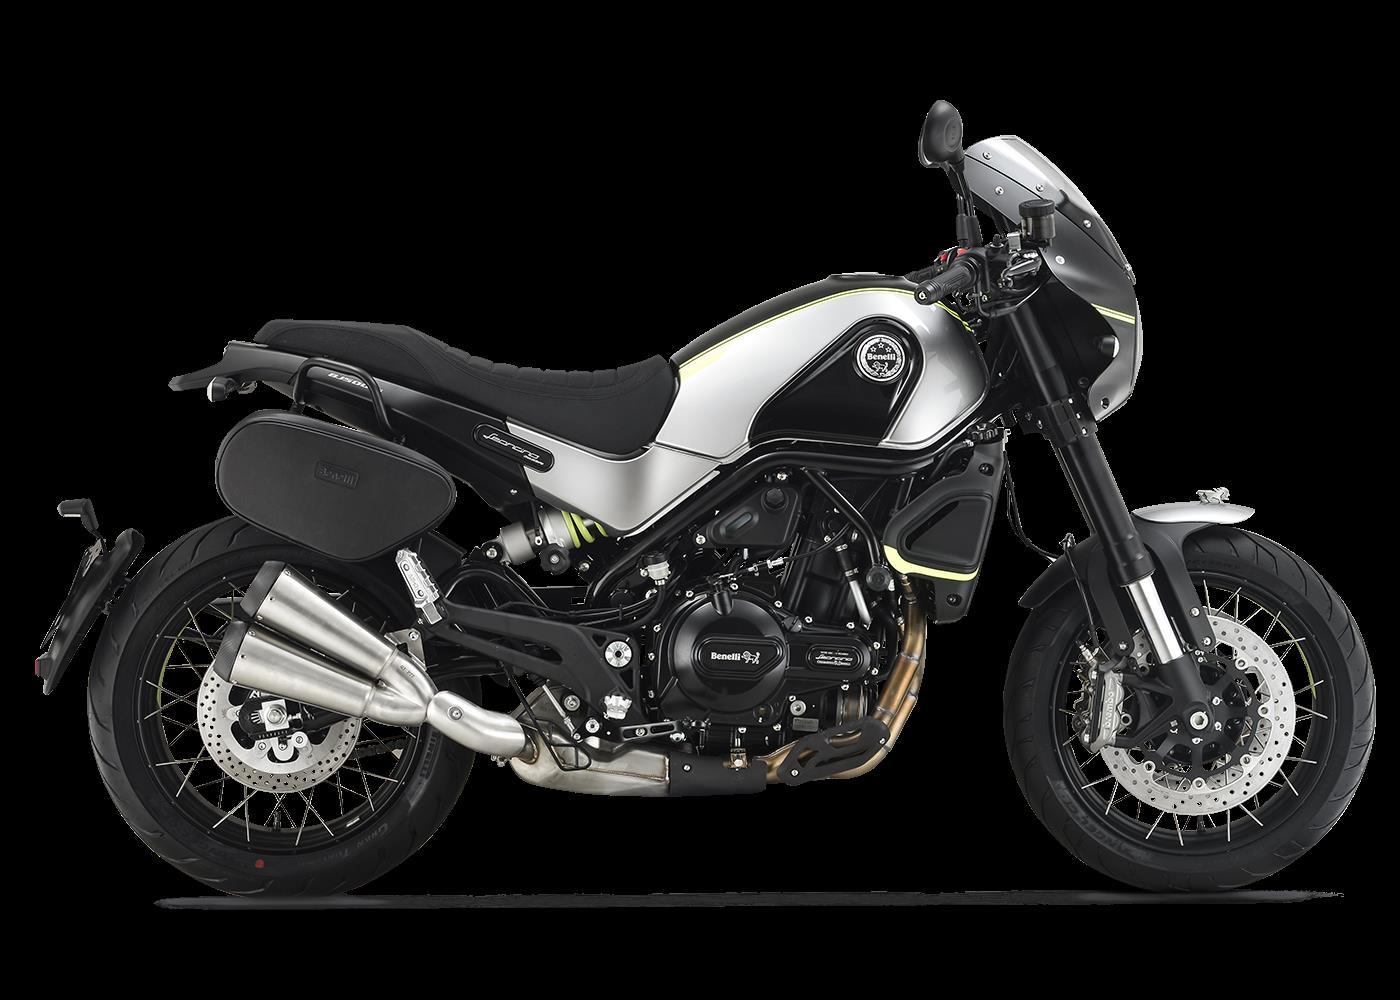 2022 Benelli Leoncino 500 Sport Specifications and Expected Price in India